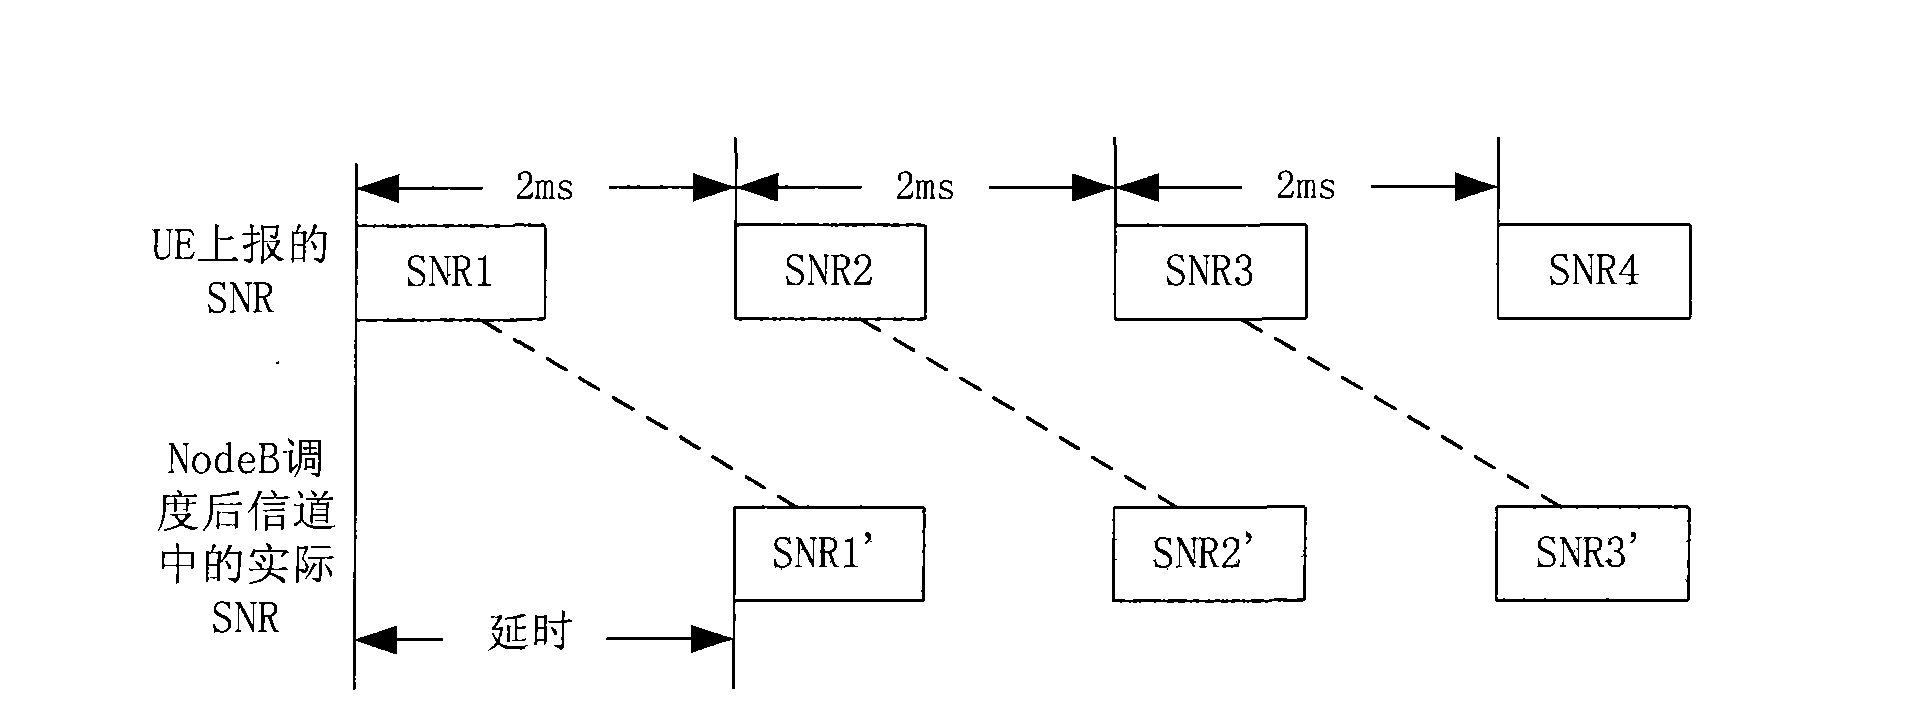 Adaptive resource allocation method for high-speed mobile 3G-HSDPA communication system